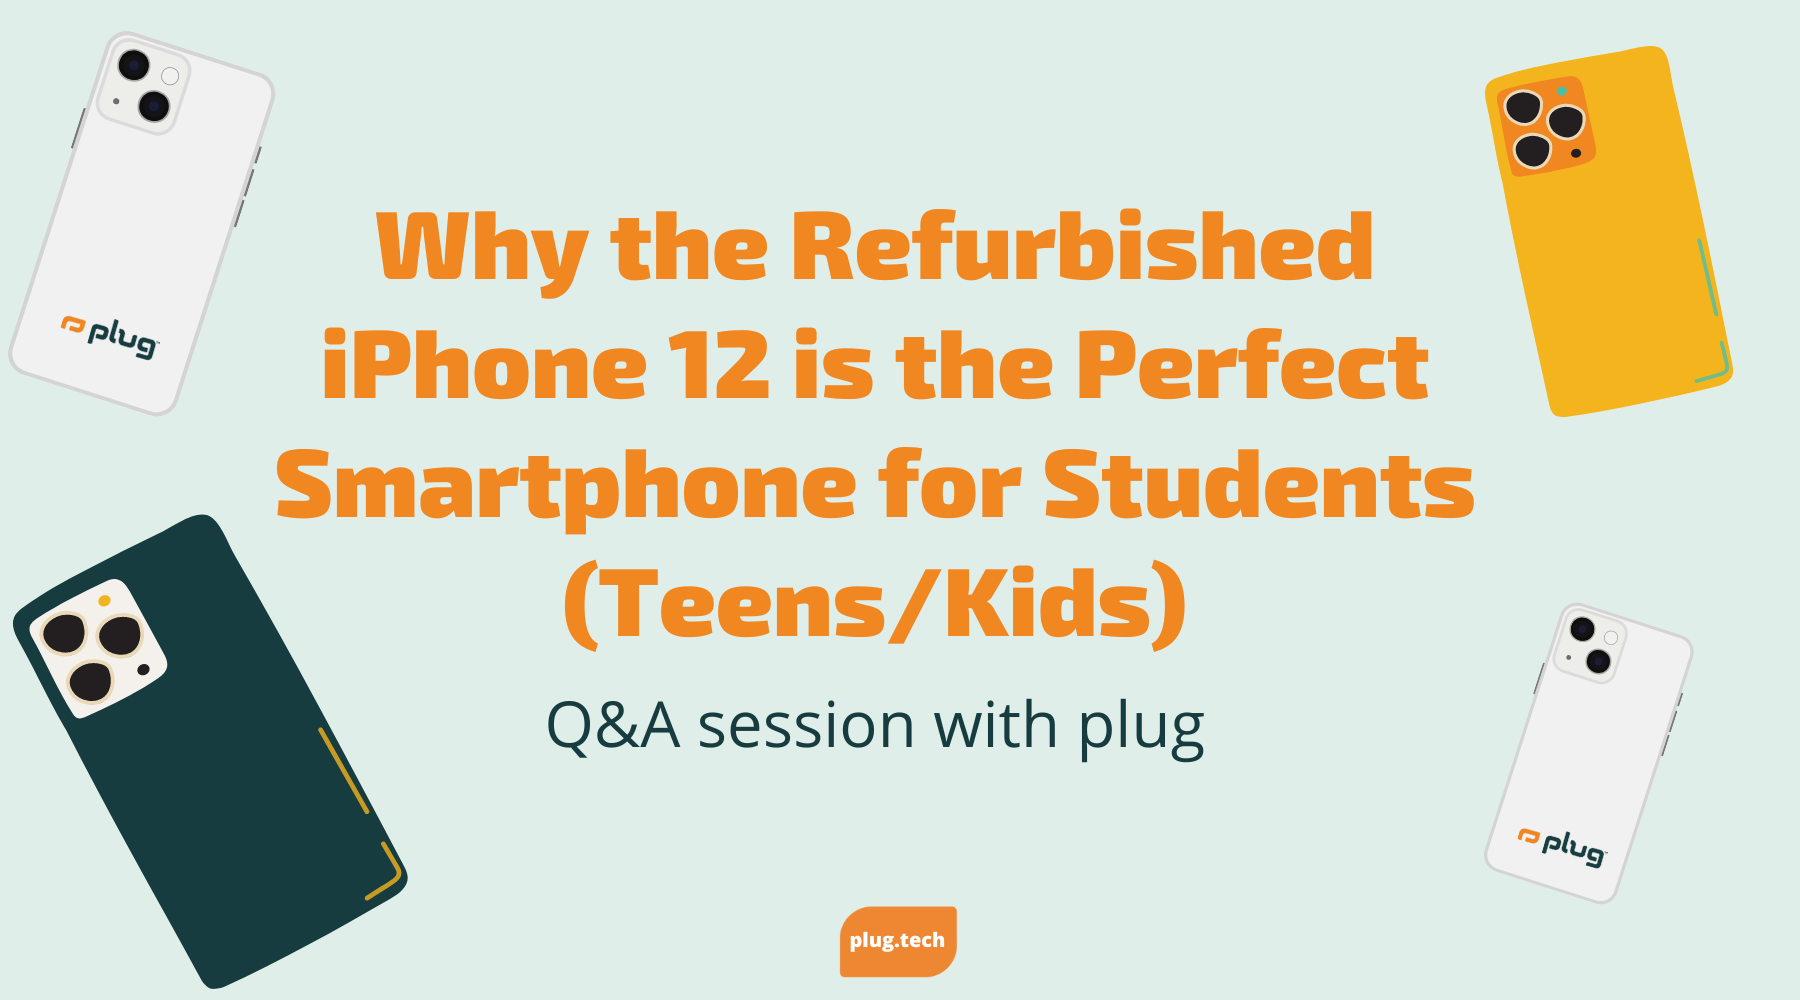 Why the Refurbished iPhone 12 is the Perfect Smartphone for Students (Teens/Kids)